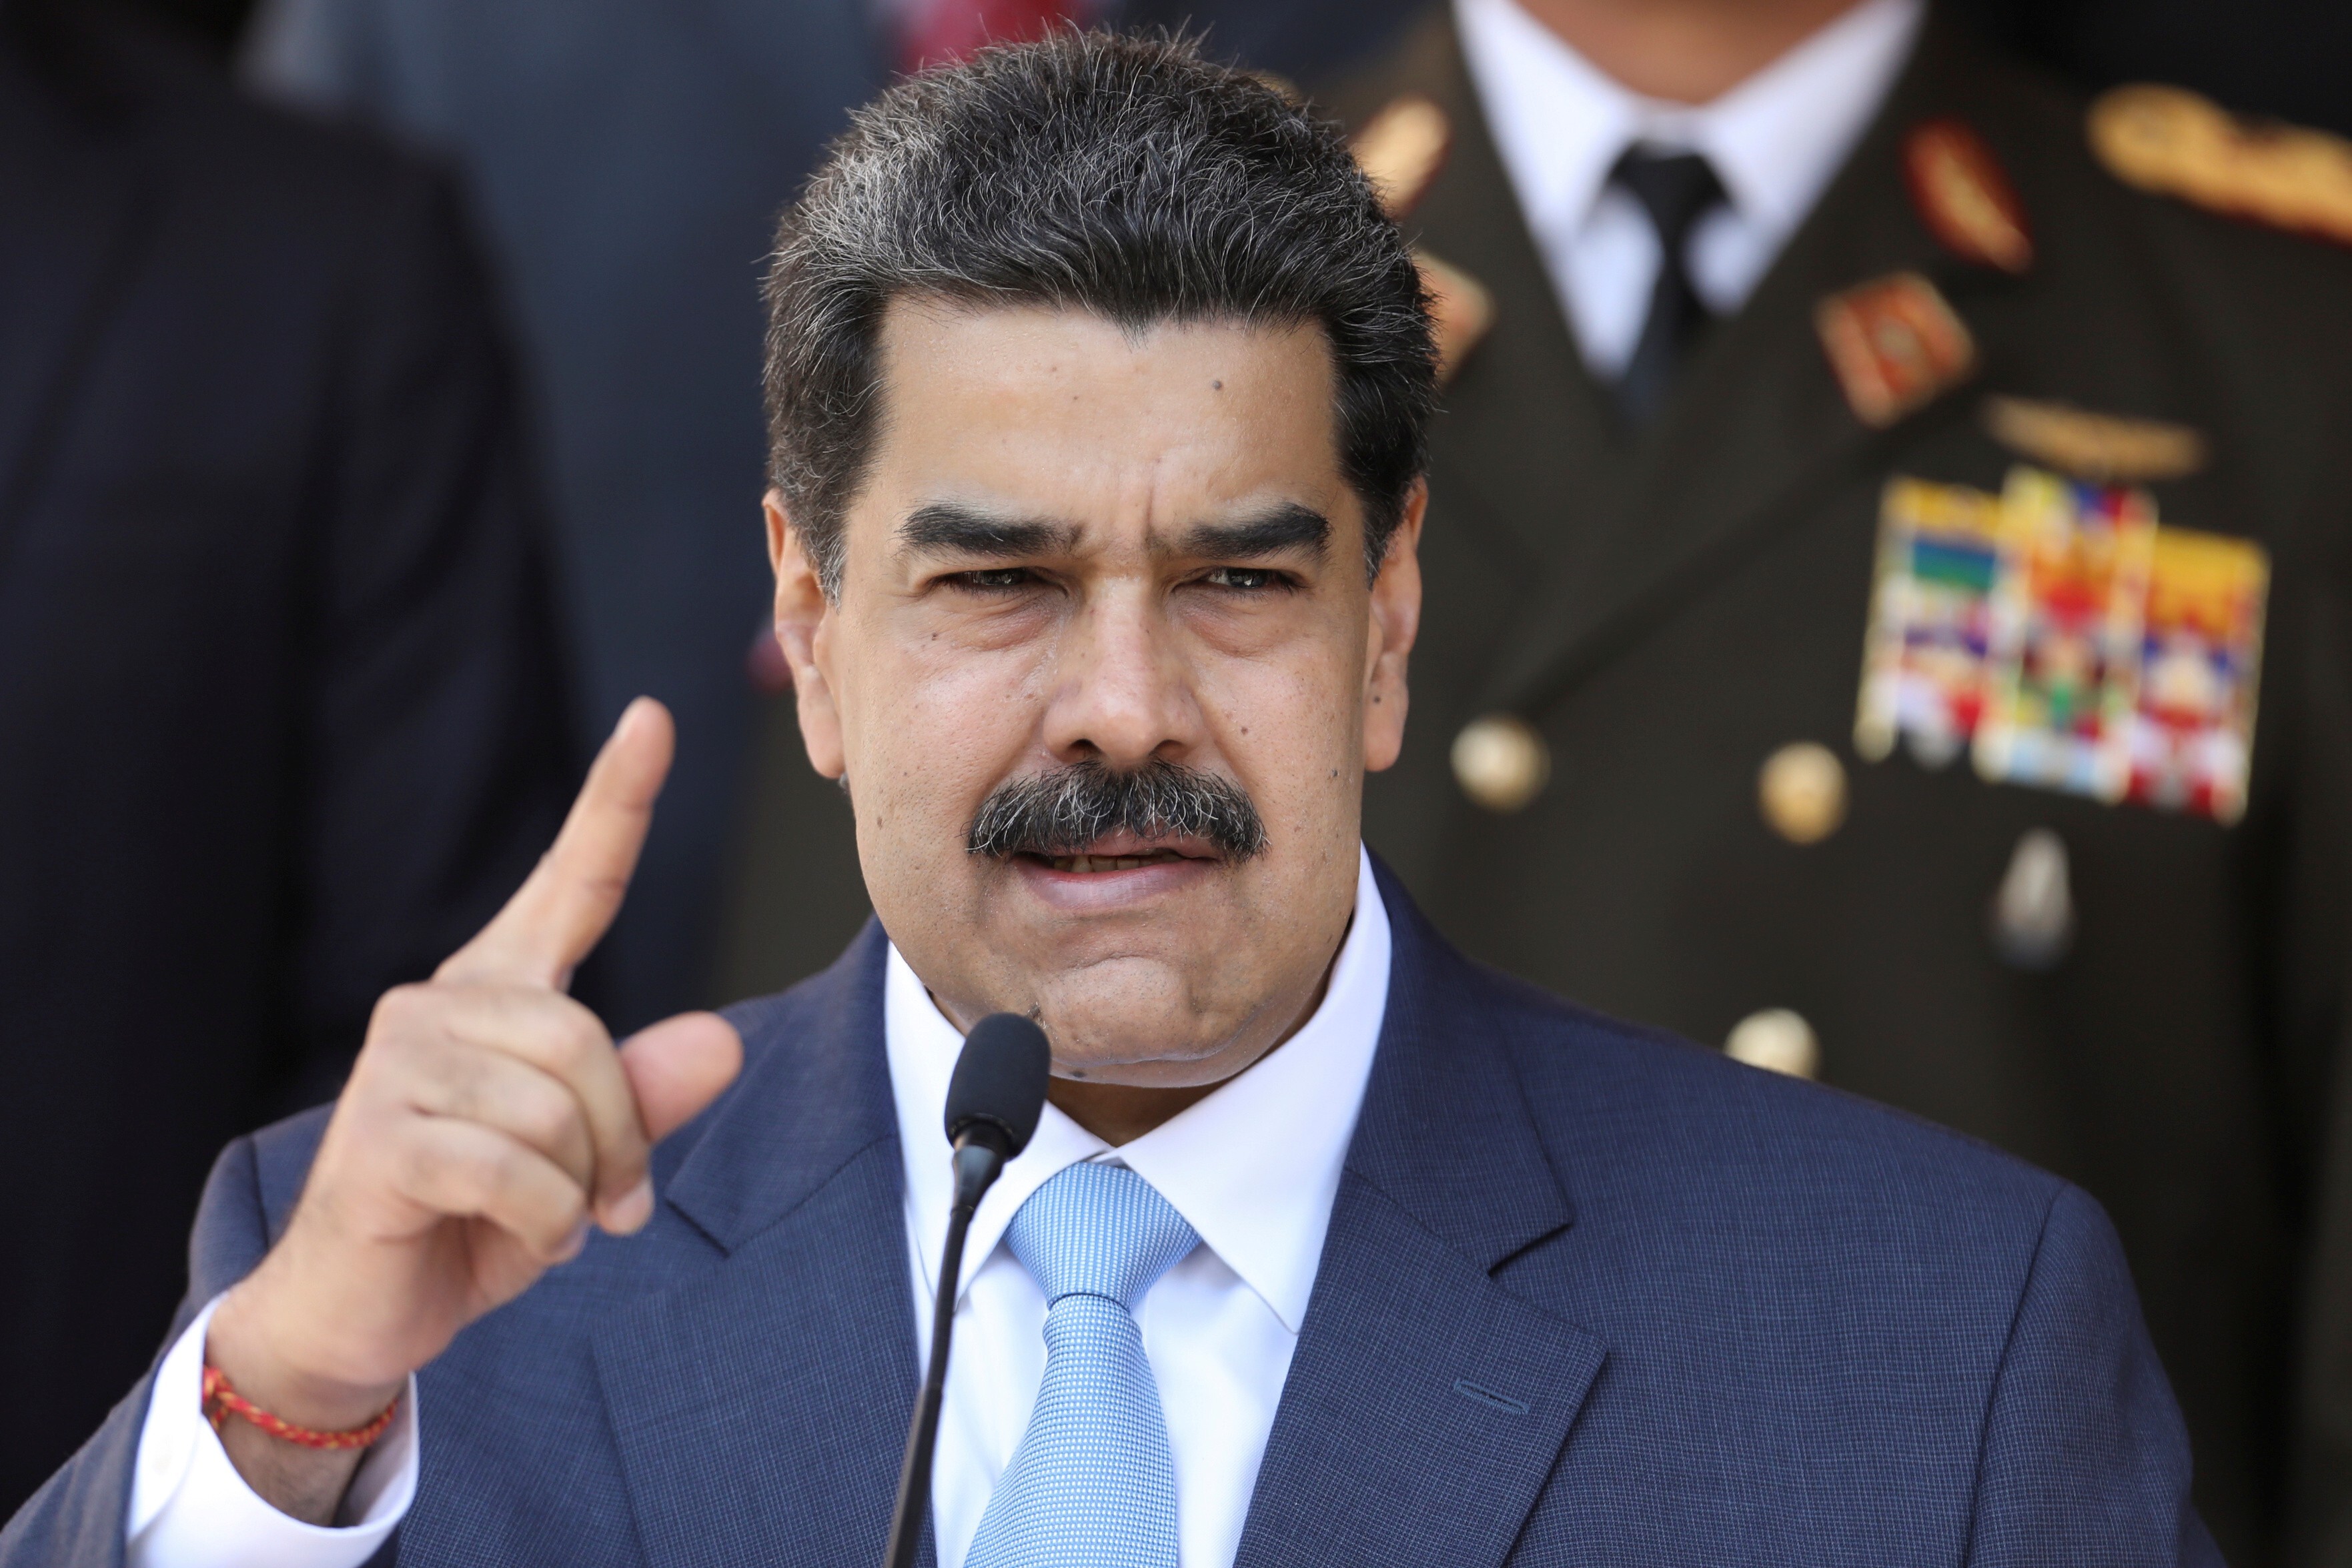 Venezuela's President Nicolas Maduro speaks during a news conference at Miraflores Palace in Caracas on March 12. Photo: Reuters